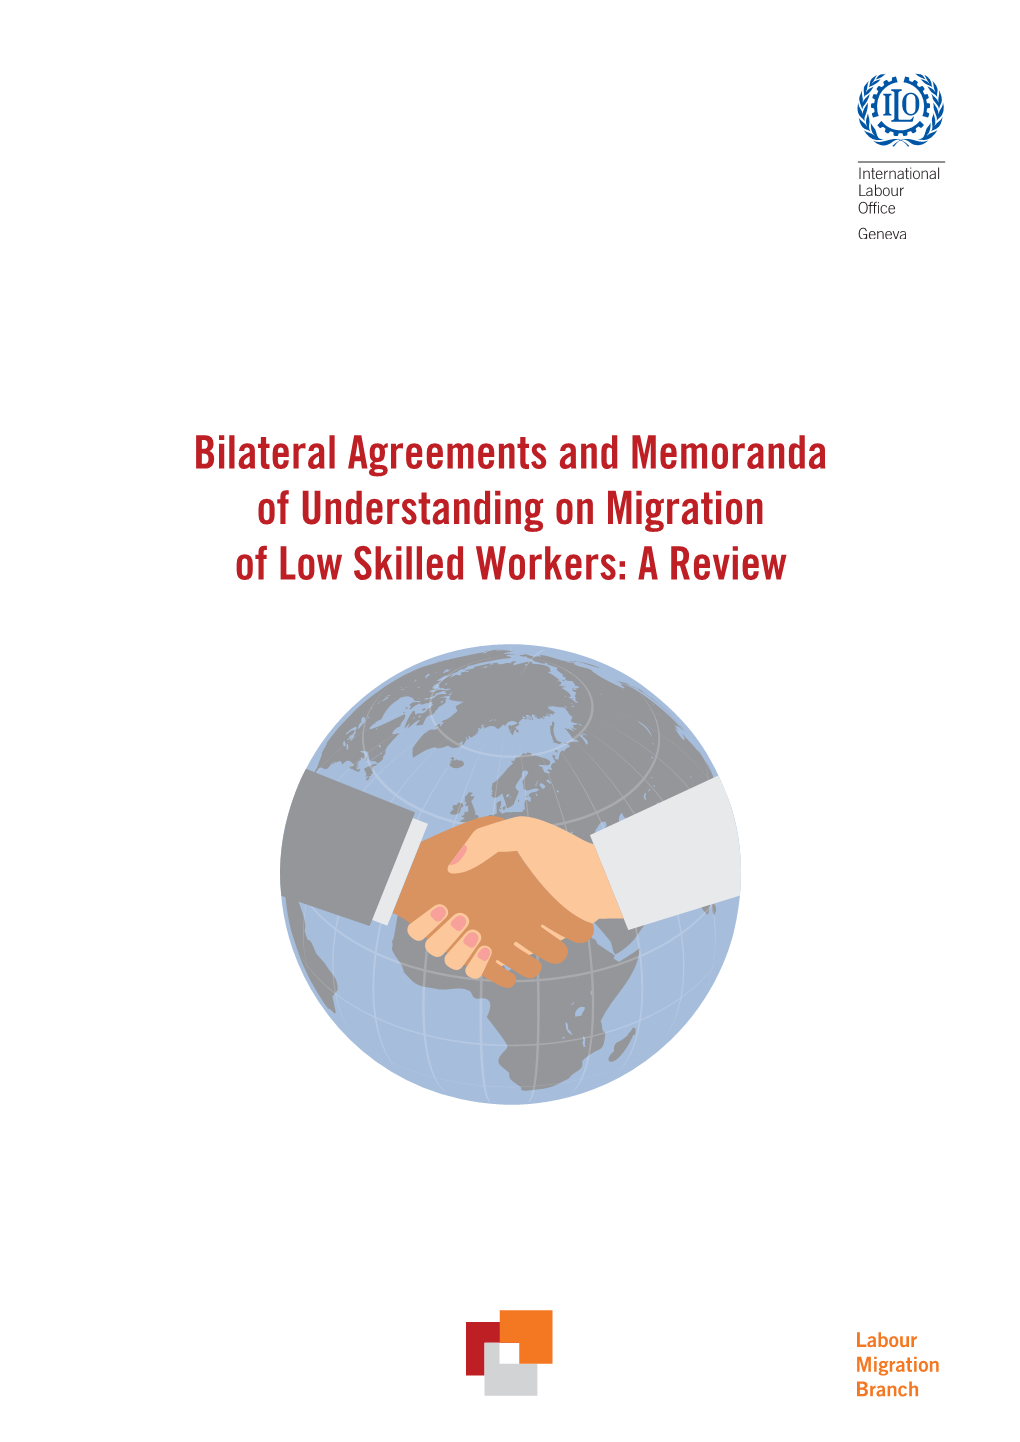 Bilateral Agreements and Memoranda of Understanding on Migration of Low Skilled Workers: a Review